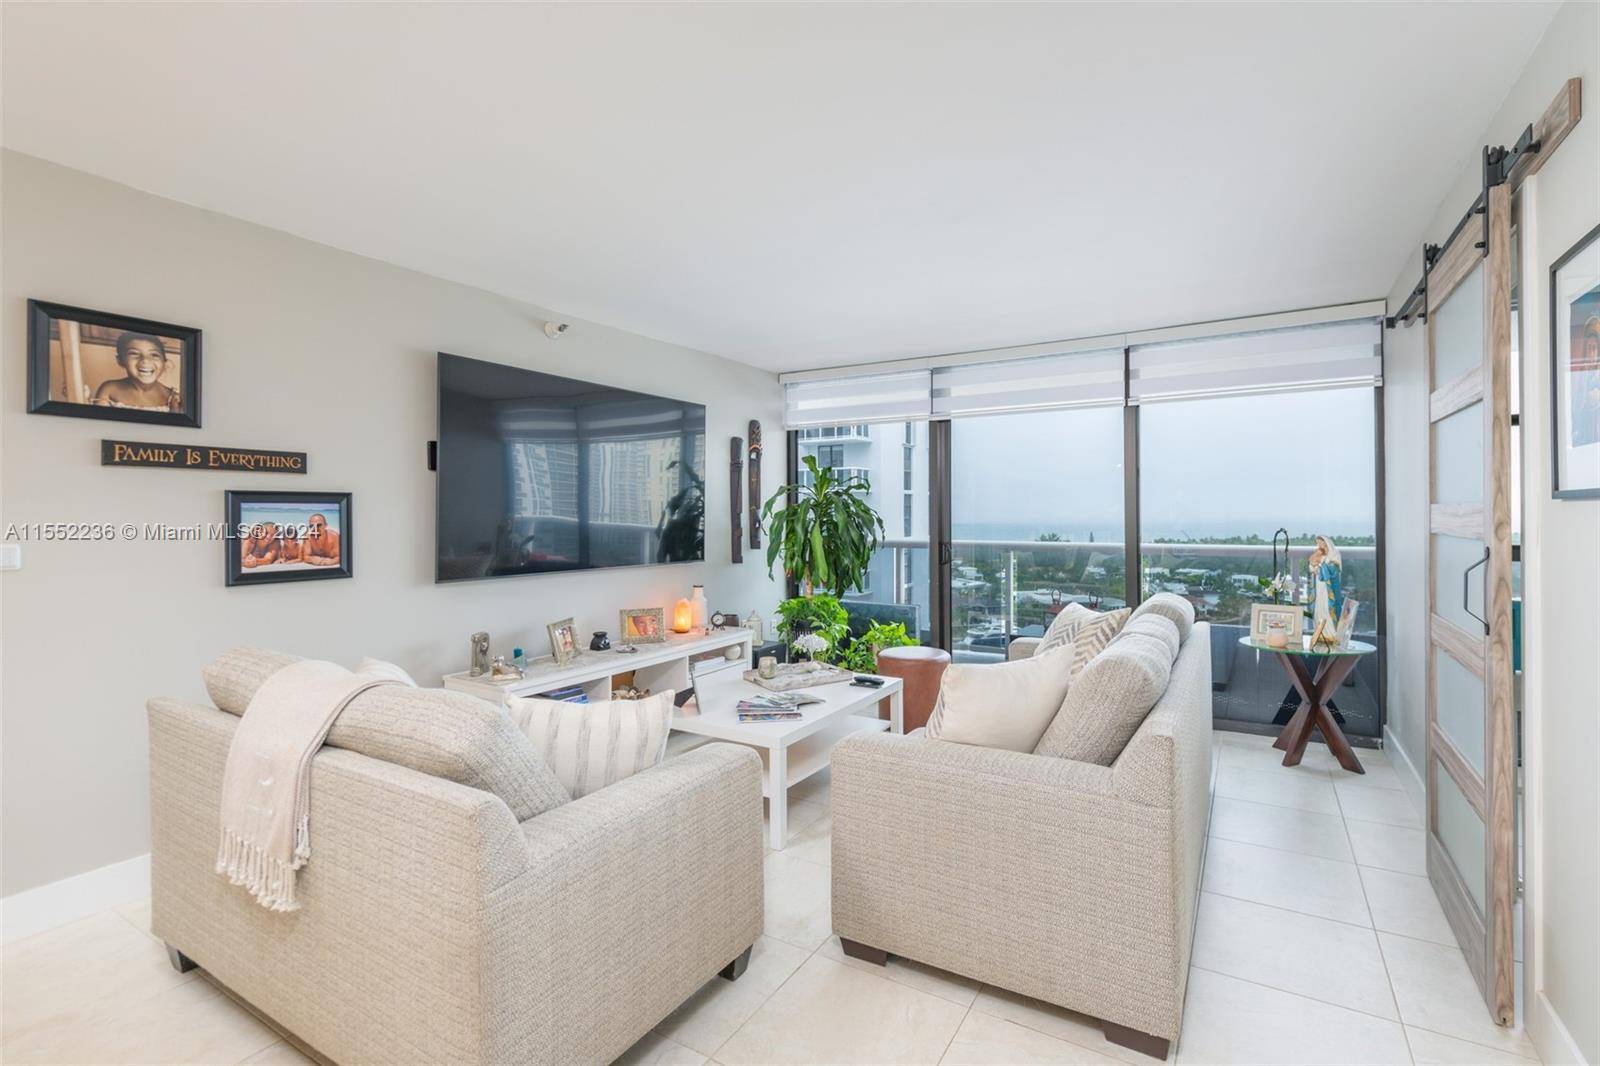 Beautiful 2 bedroom with 2 full bath This modern style apartment has views of the Ocean and Intracoastal new appliances, big balcony 24hr security front desk, valet parking, and great ...